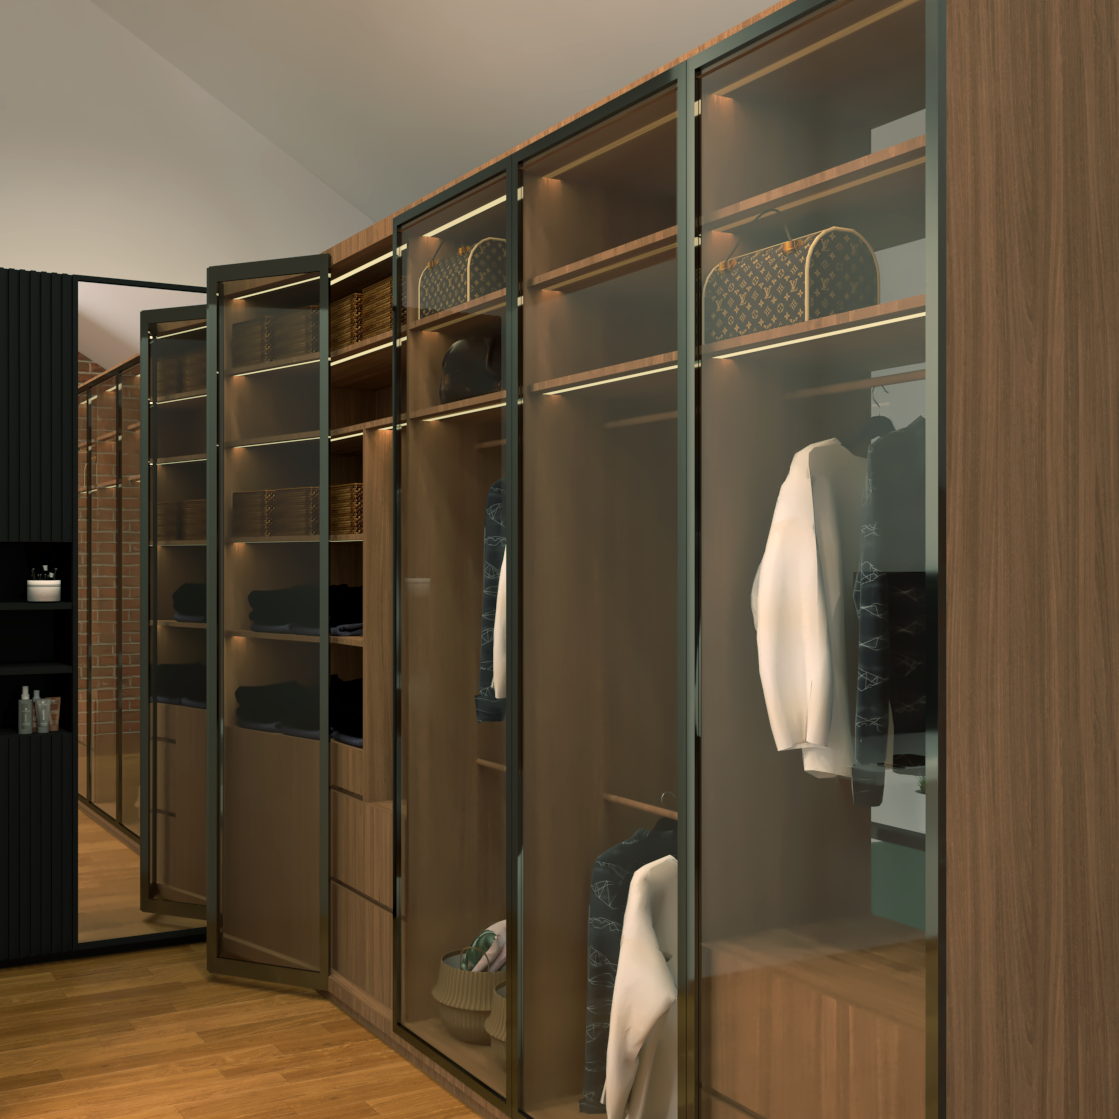 Glass Shutters Industrial Wardrobe Design with Shelves